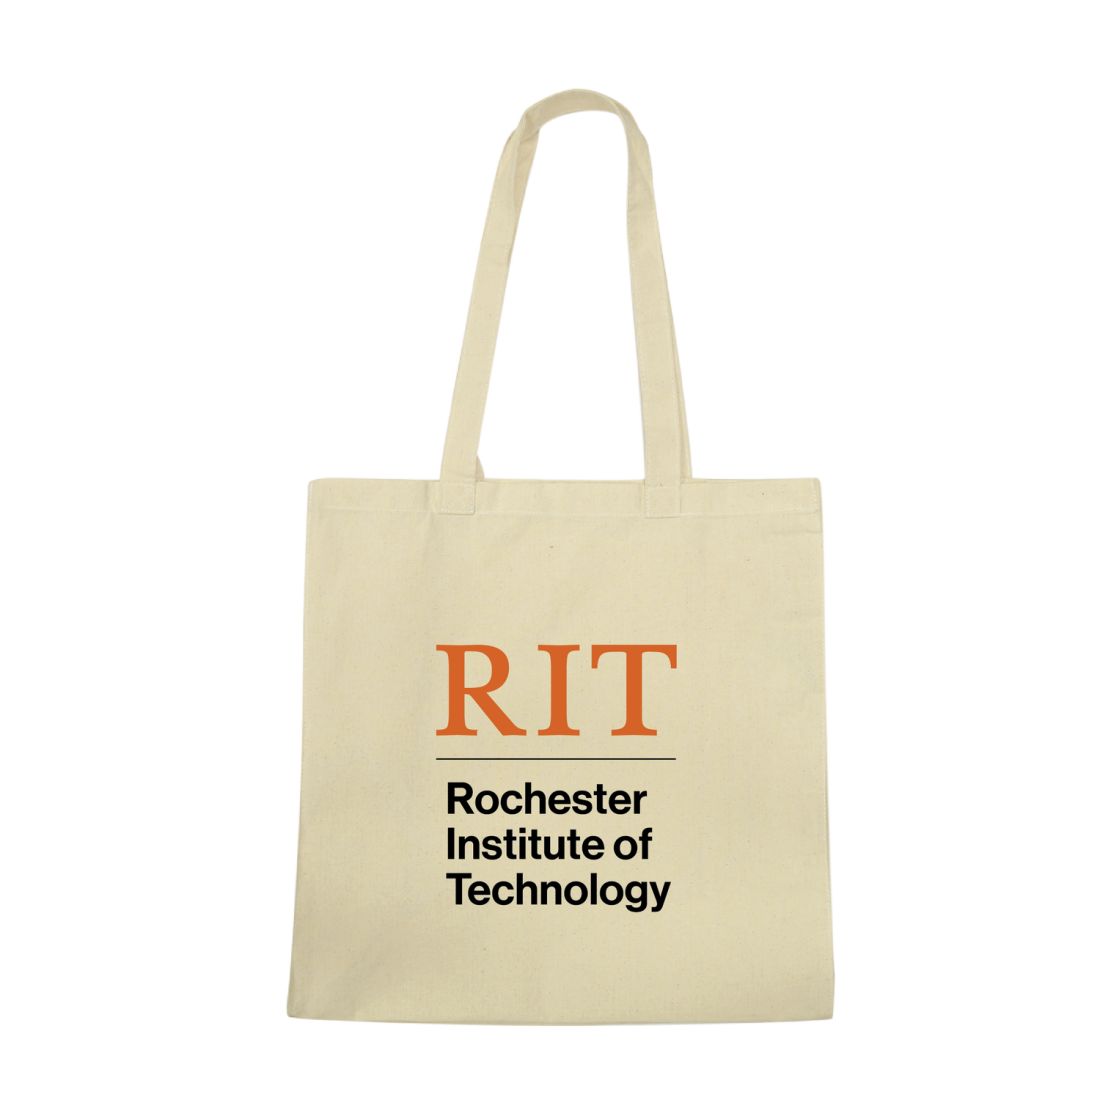 RIT Rochester Institute of Technology Tigers Institutional Tote Bag